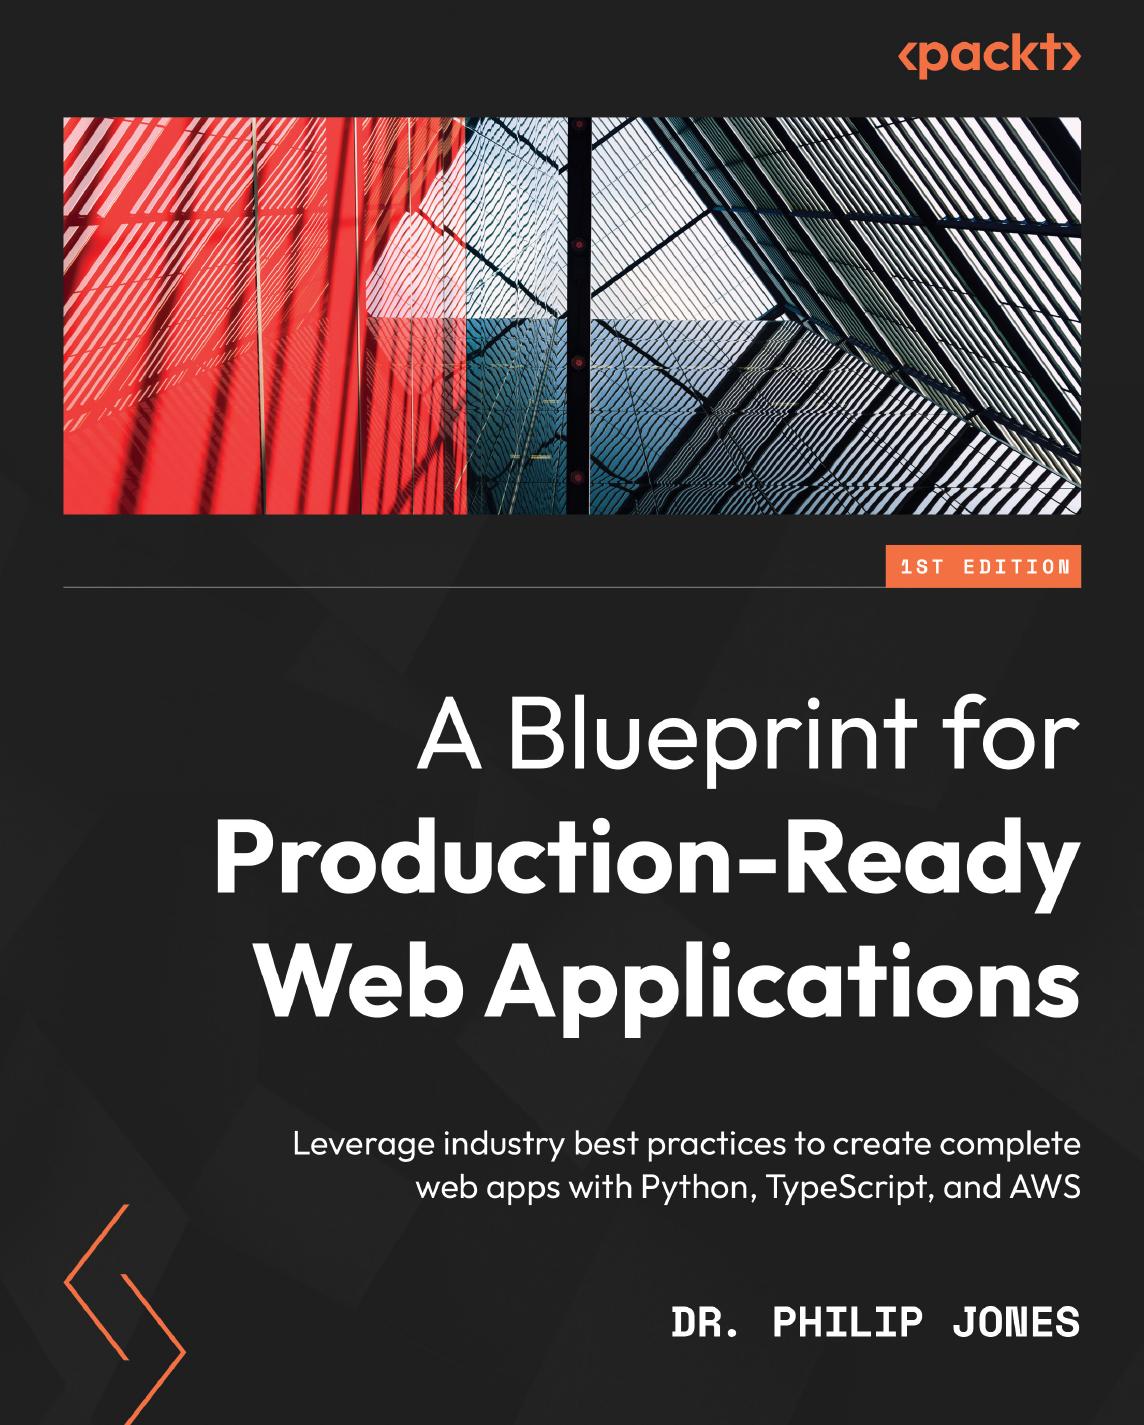 A Blueprint for Production-Ready Web Applications: Leverage industry best practices to create complete web apps with Python, TypeScript, and AWS by Dr. Philip Jones